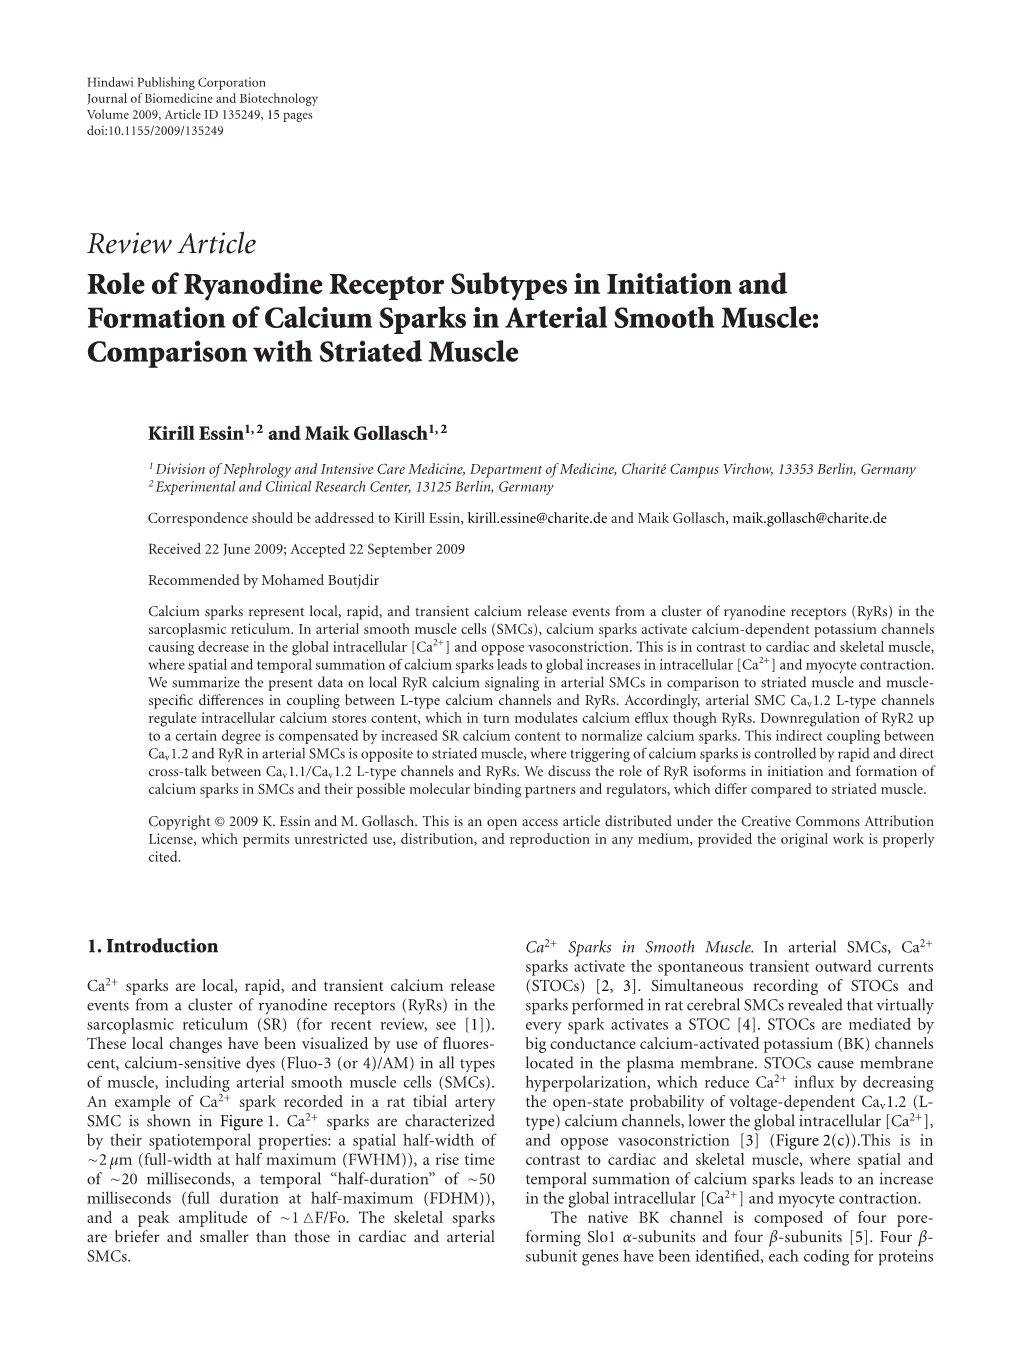 Role of Ryanodine Receptor Subtypes in Initiation and Formation of Calcium Sparks in Arterial Smooth Muscle: Comparison with Striated Muscle